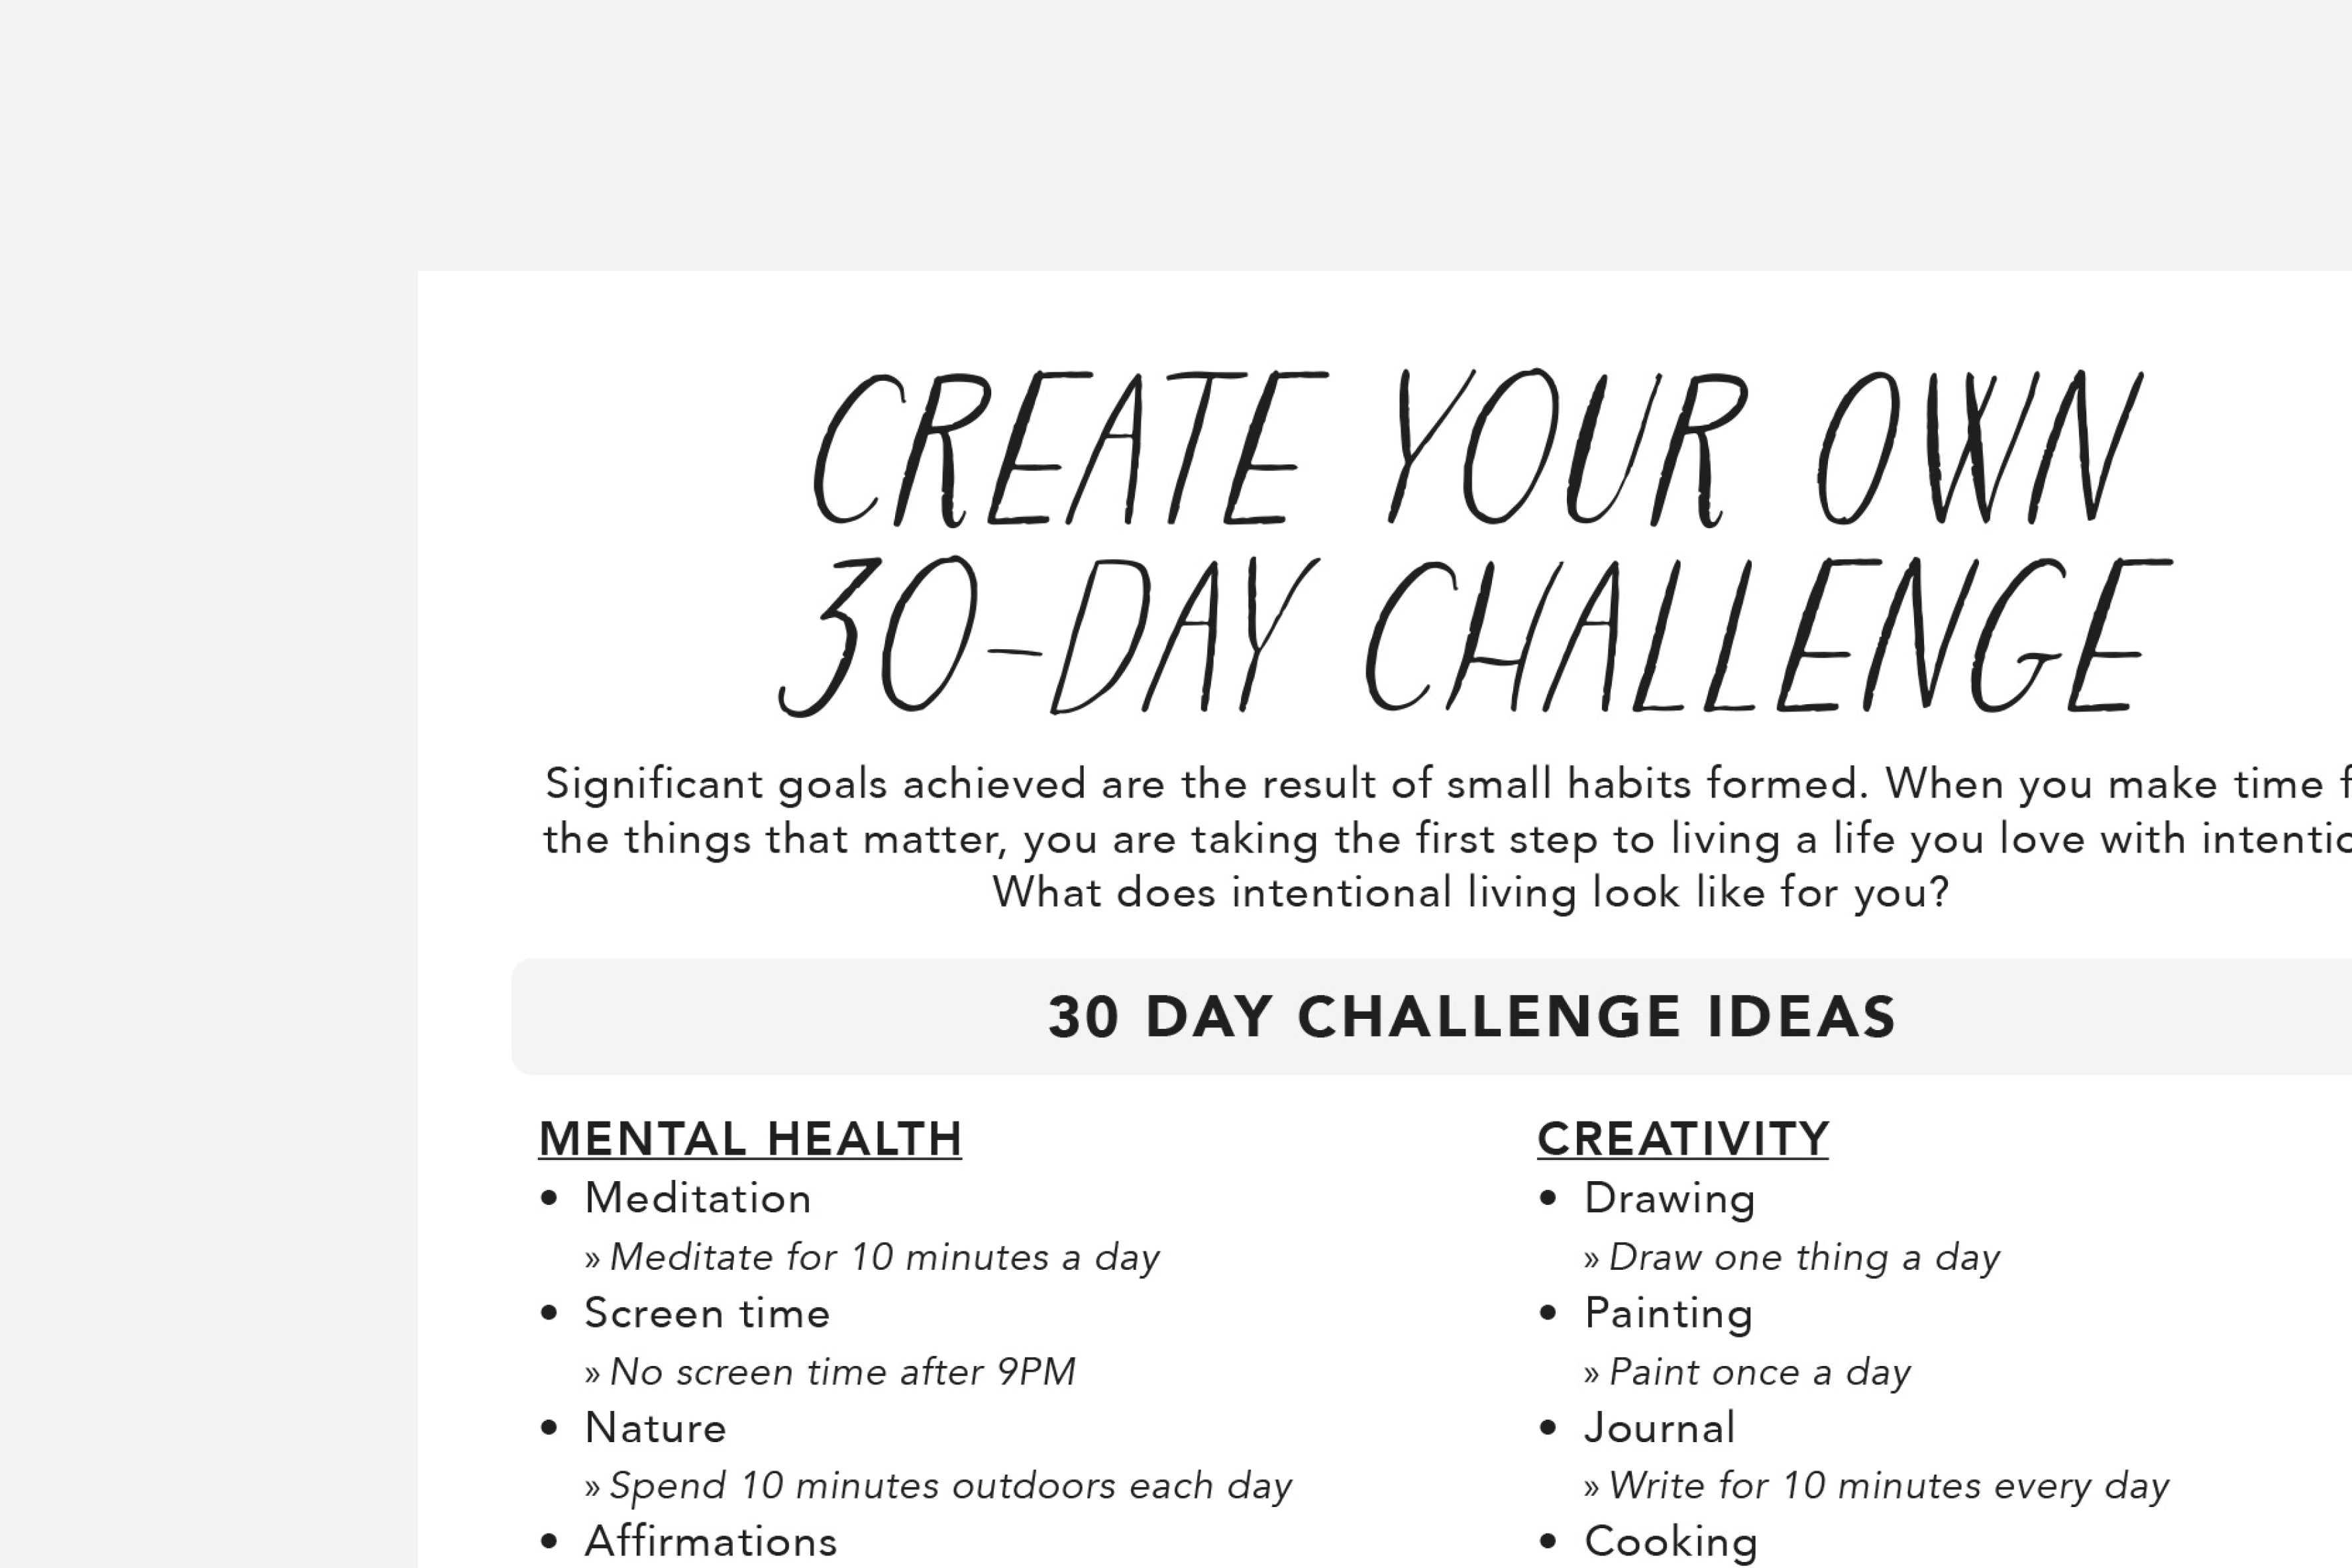 Create Your Own 30-Day Challenge